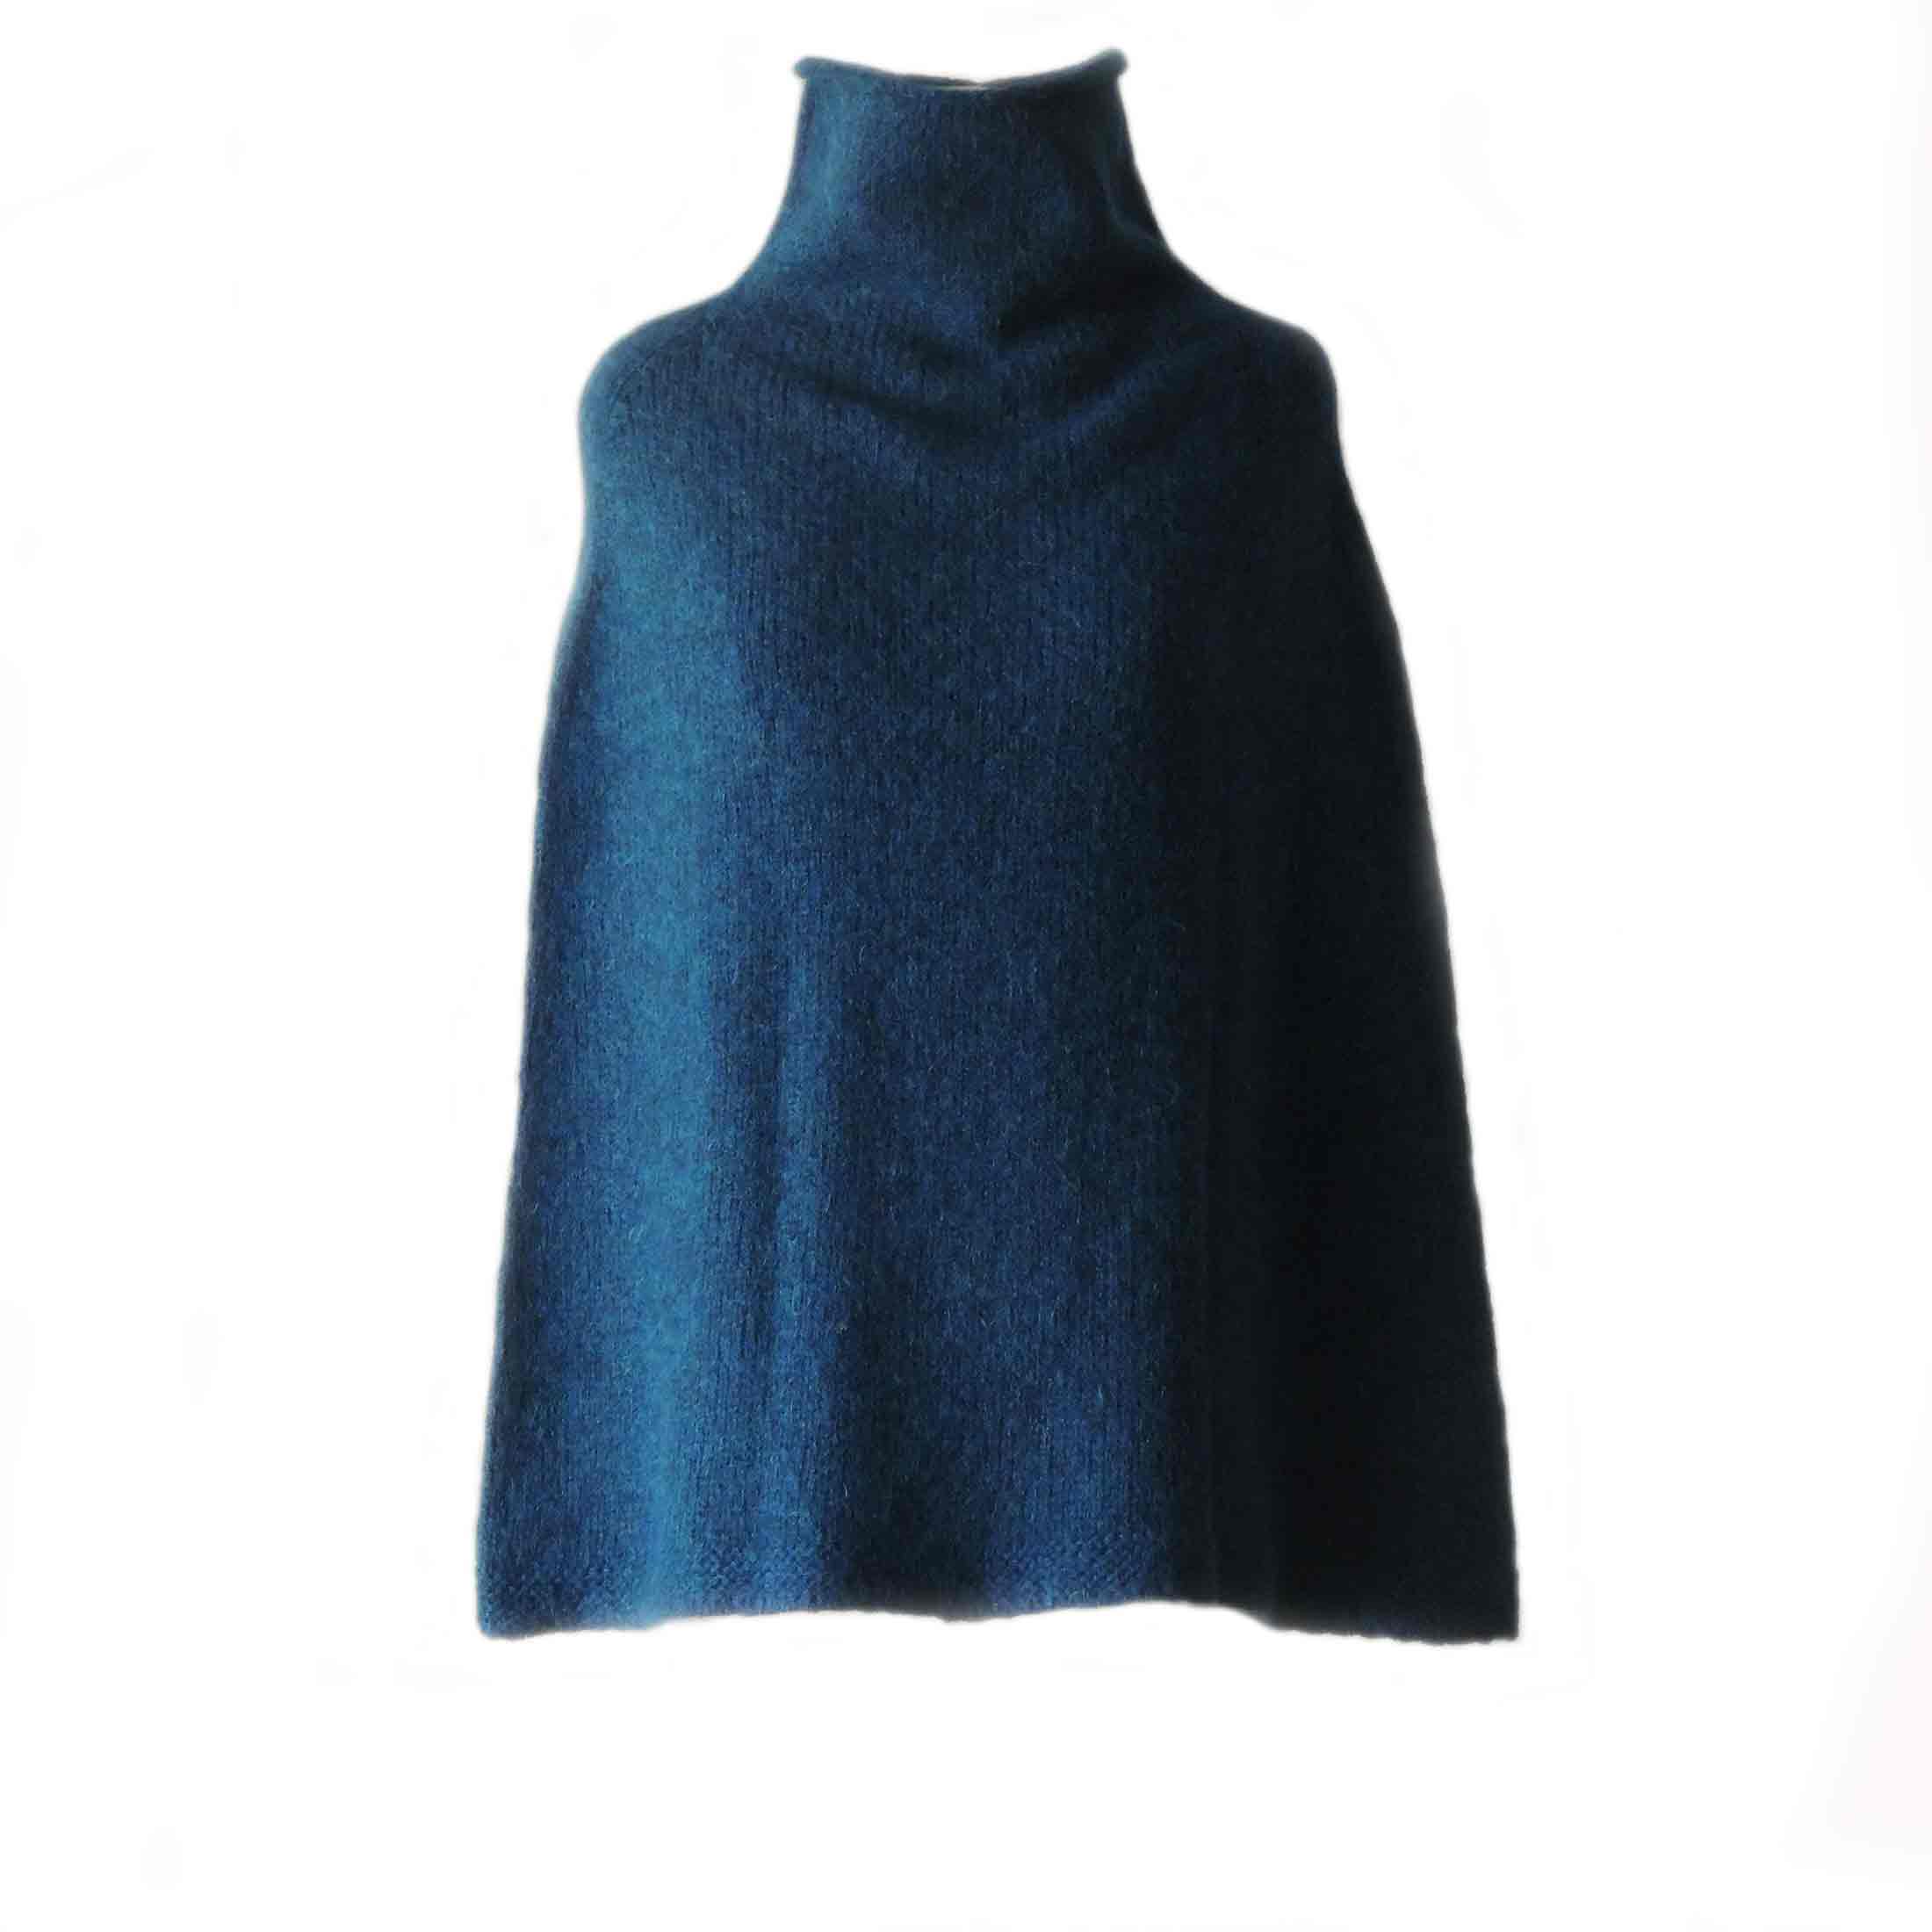 PopsFL knitwear wholesale, Women's poncho- cape can also be used as scarve, solid color with boat neck in felted alpaca blend